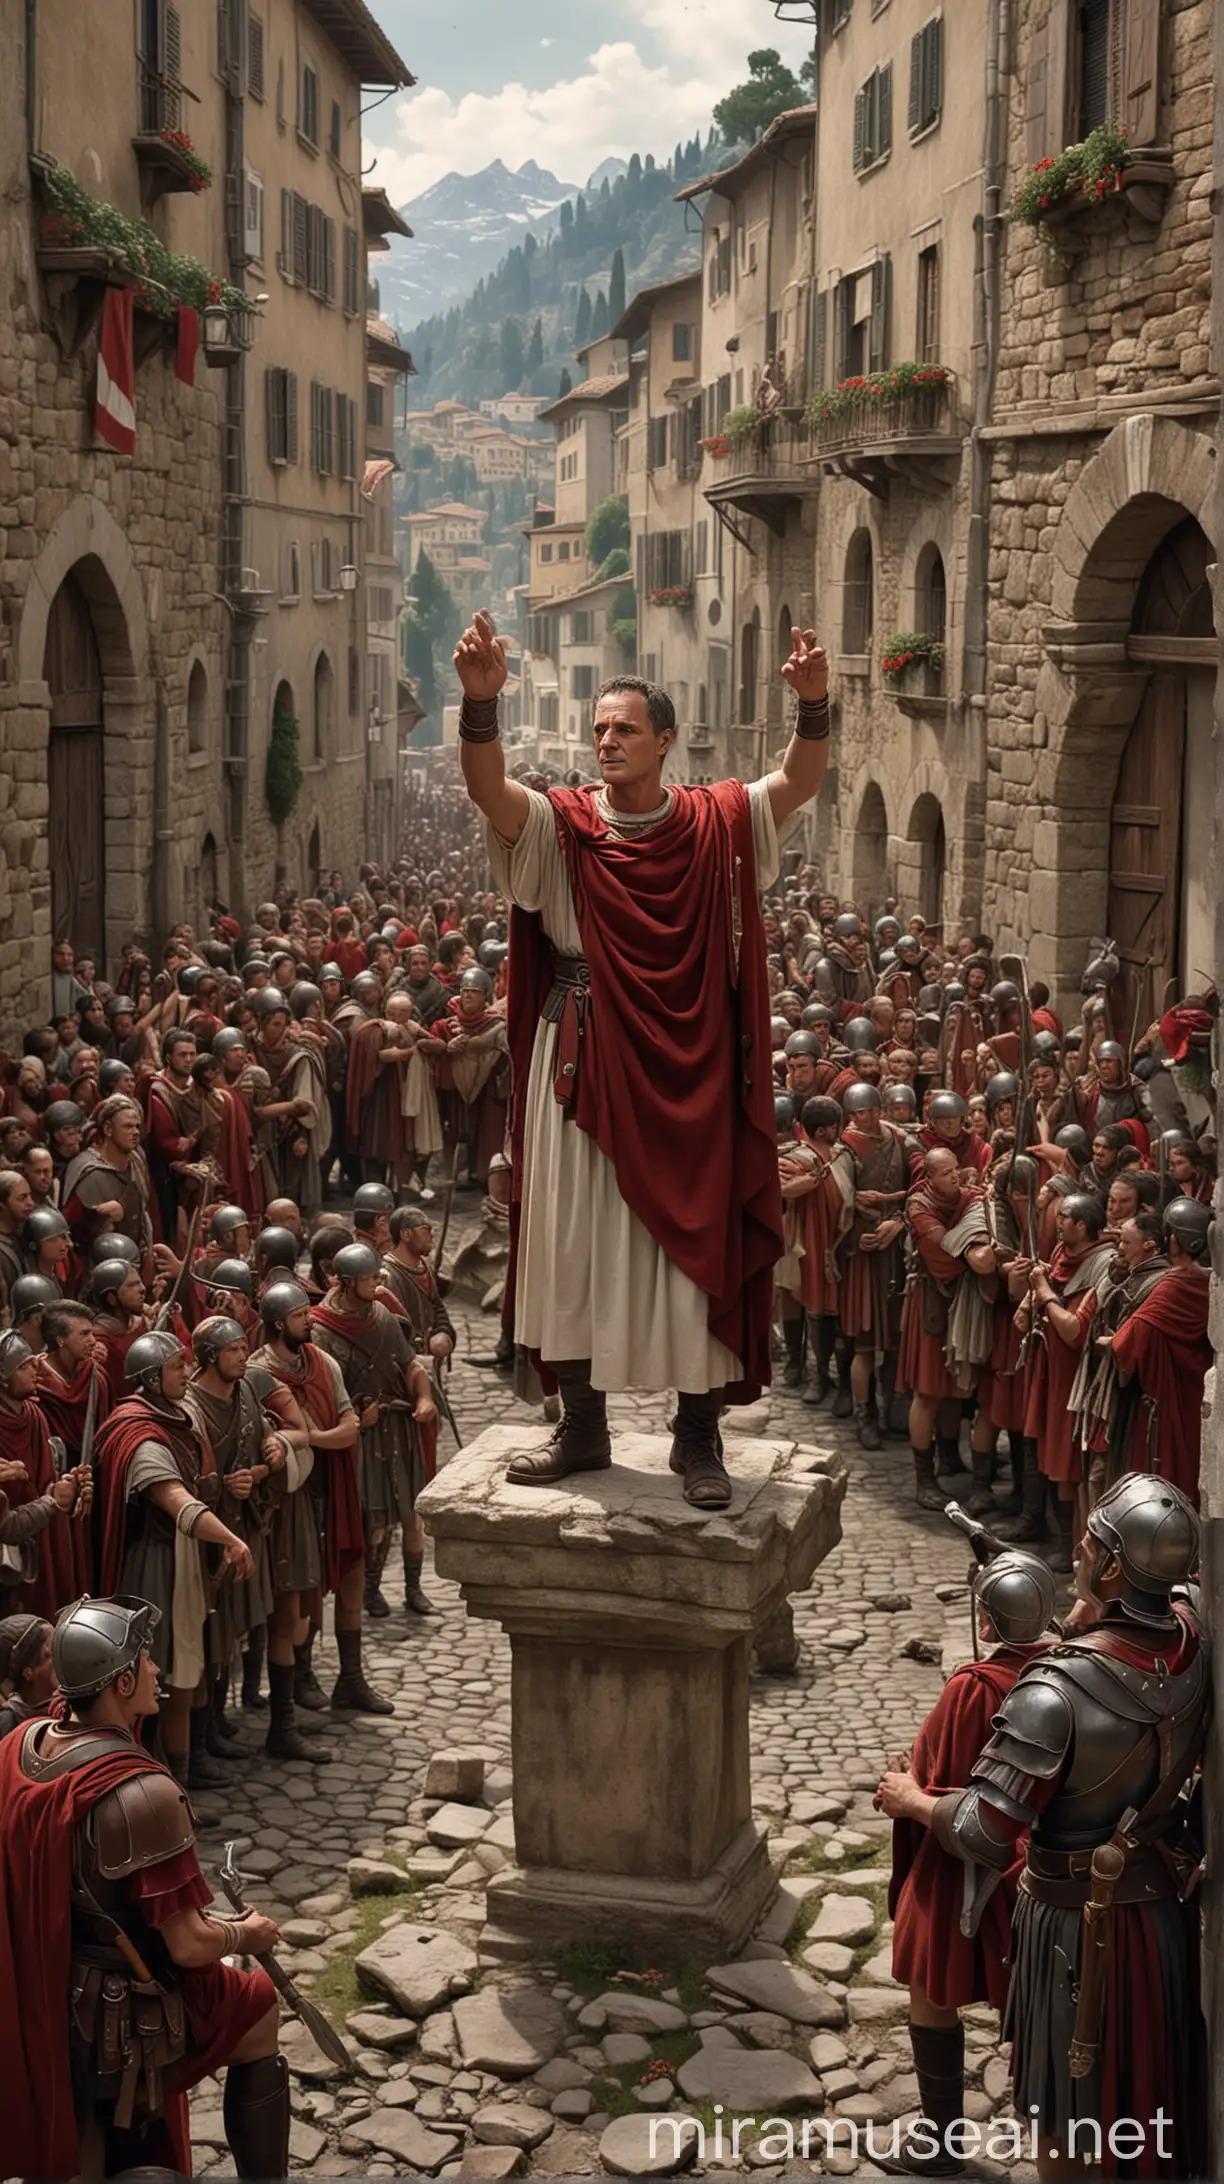  Illustrate Julius Caesar declaring "I'd rather be the first here than the second in Rome!" while addressing his soldiers in a small Alpine town, showcasing his fierce ambition and leadership. hyper realistic